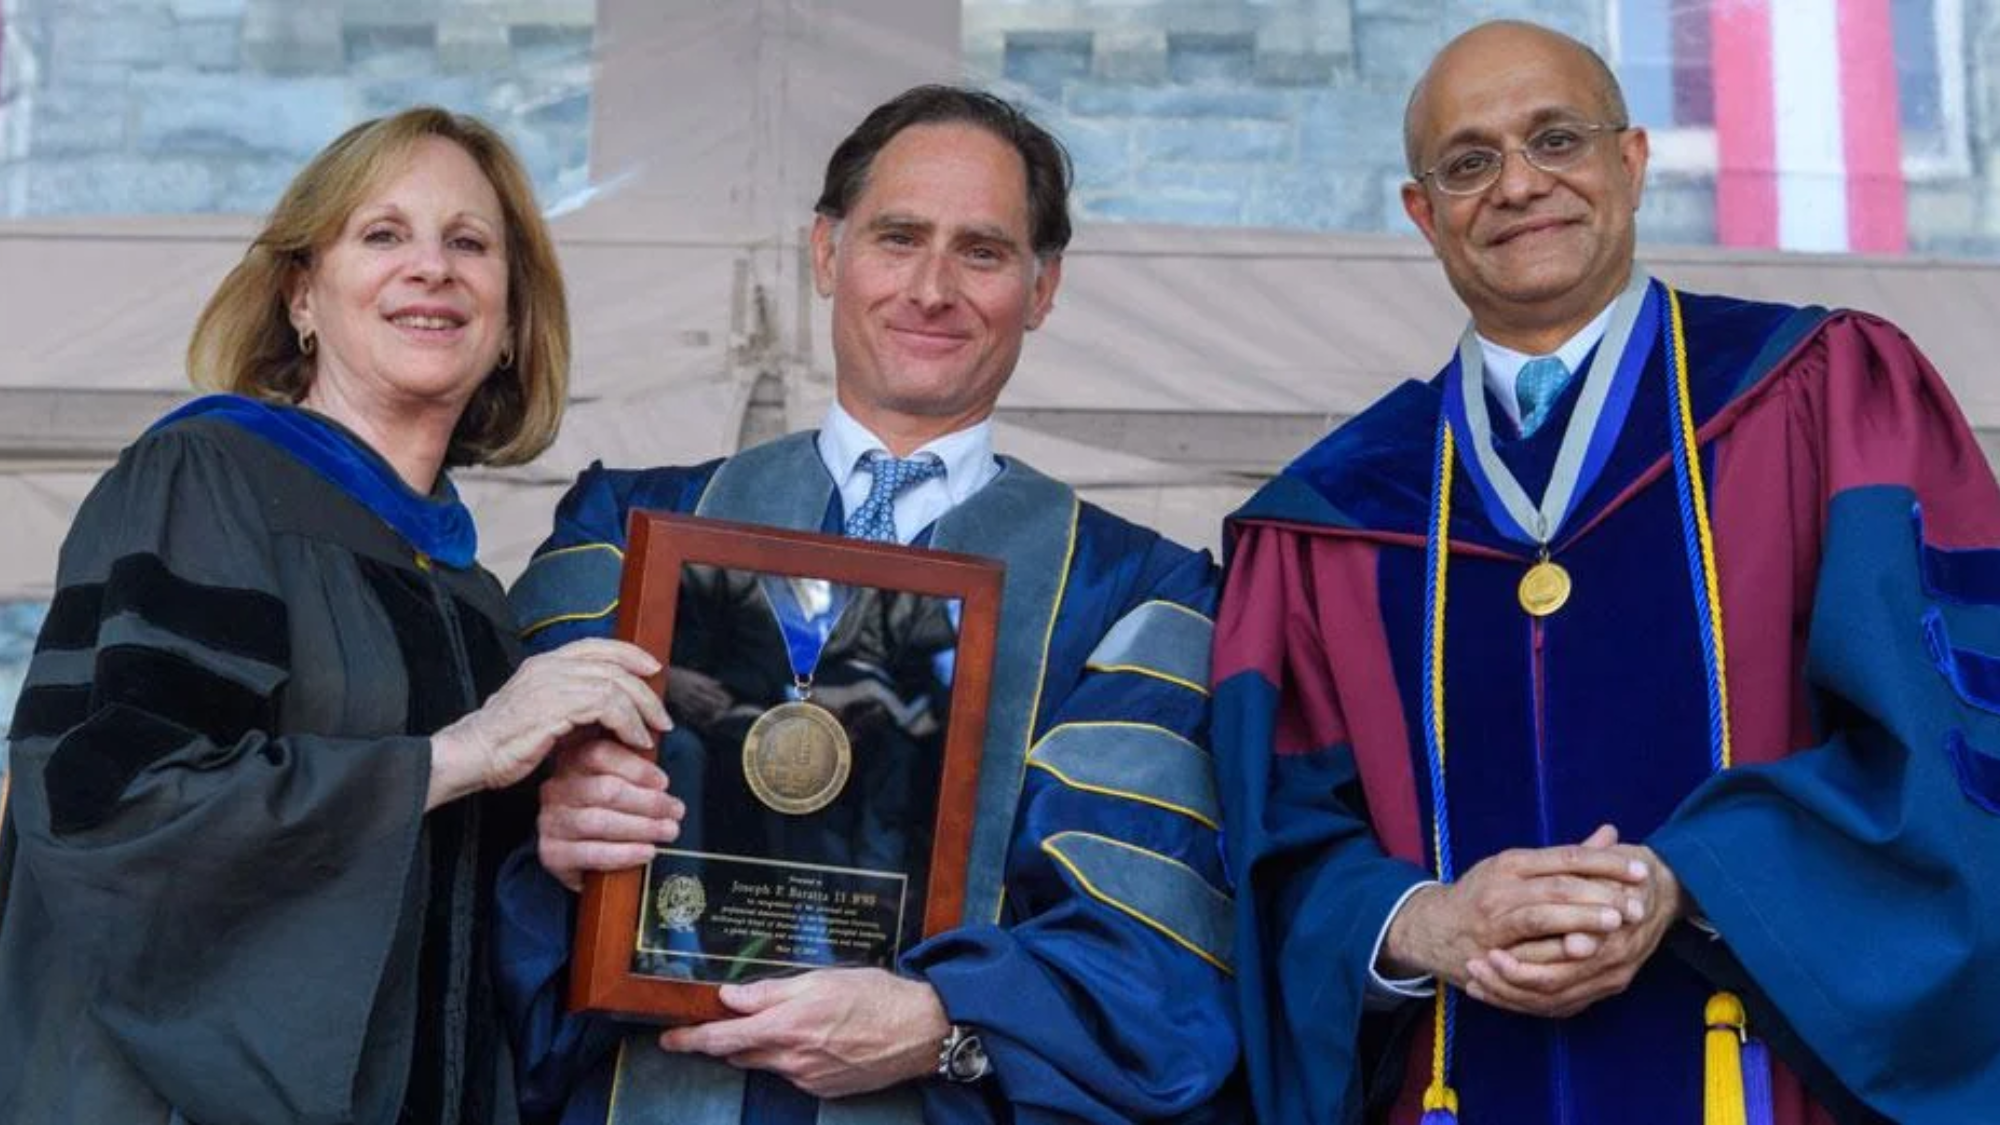 Joe Baratta, at center, was a commencement speaker for the McDonough School of Business in 2019. His remarks highlight the 